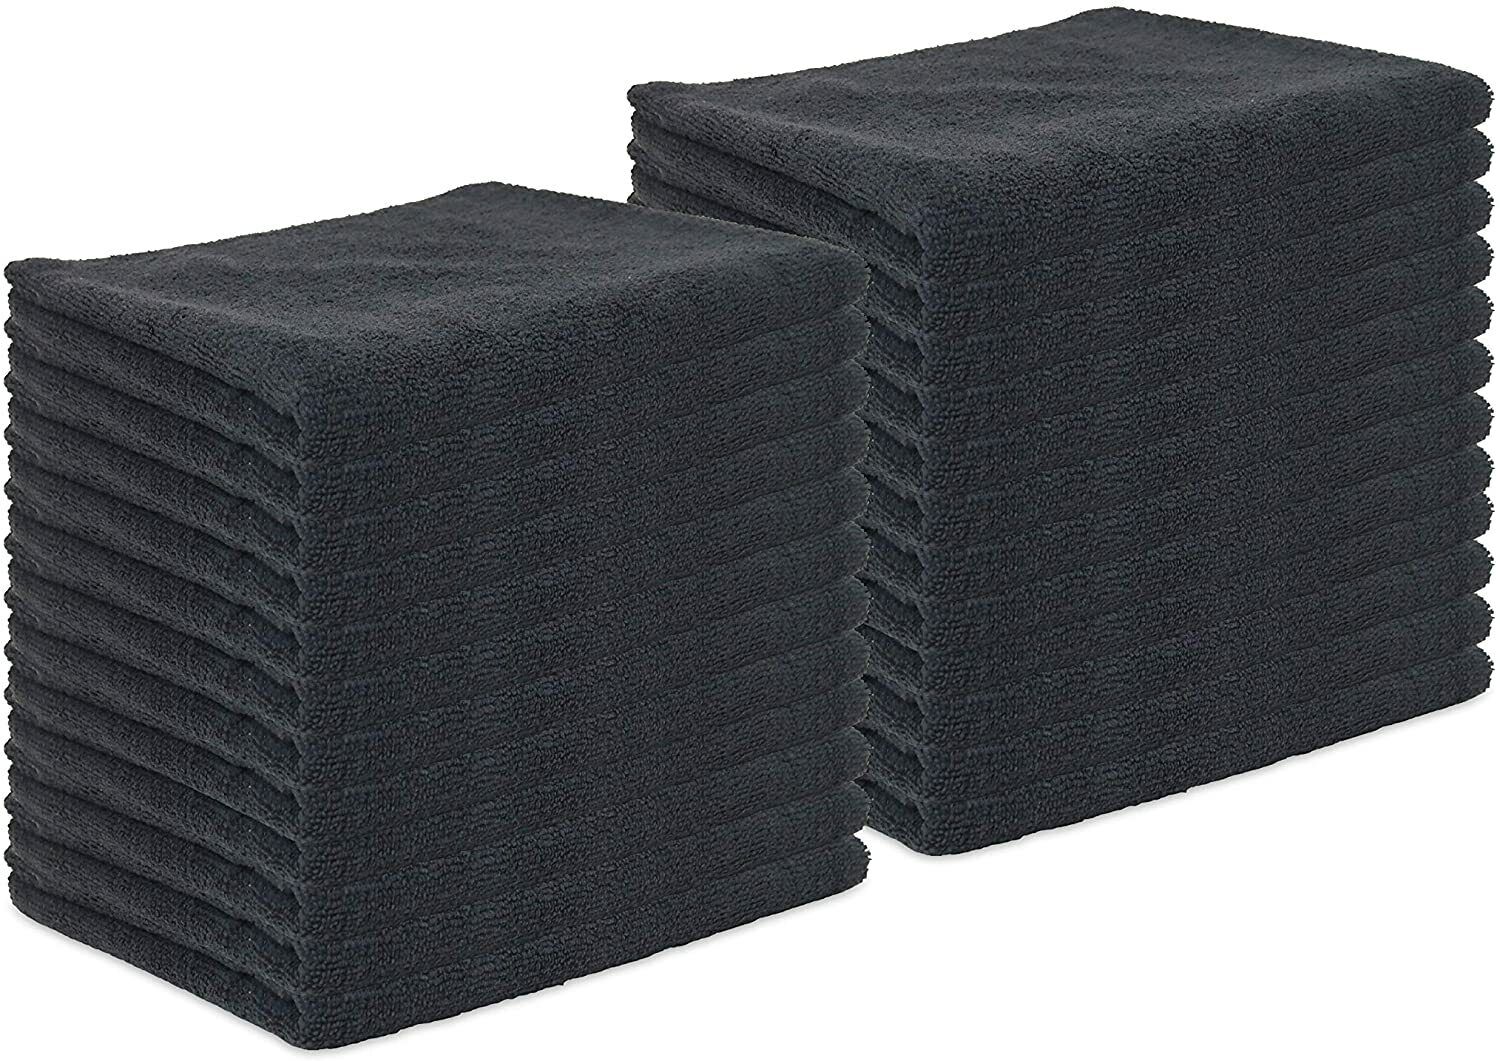 24 Pack of Microfiber Salon Towels - Bleach Safe - Black 16 x 27 - Stylist Towel Arkwright Does Not Apply - фотография #2